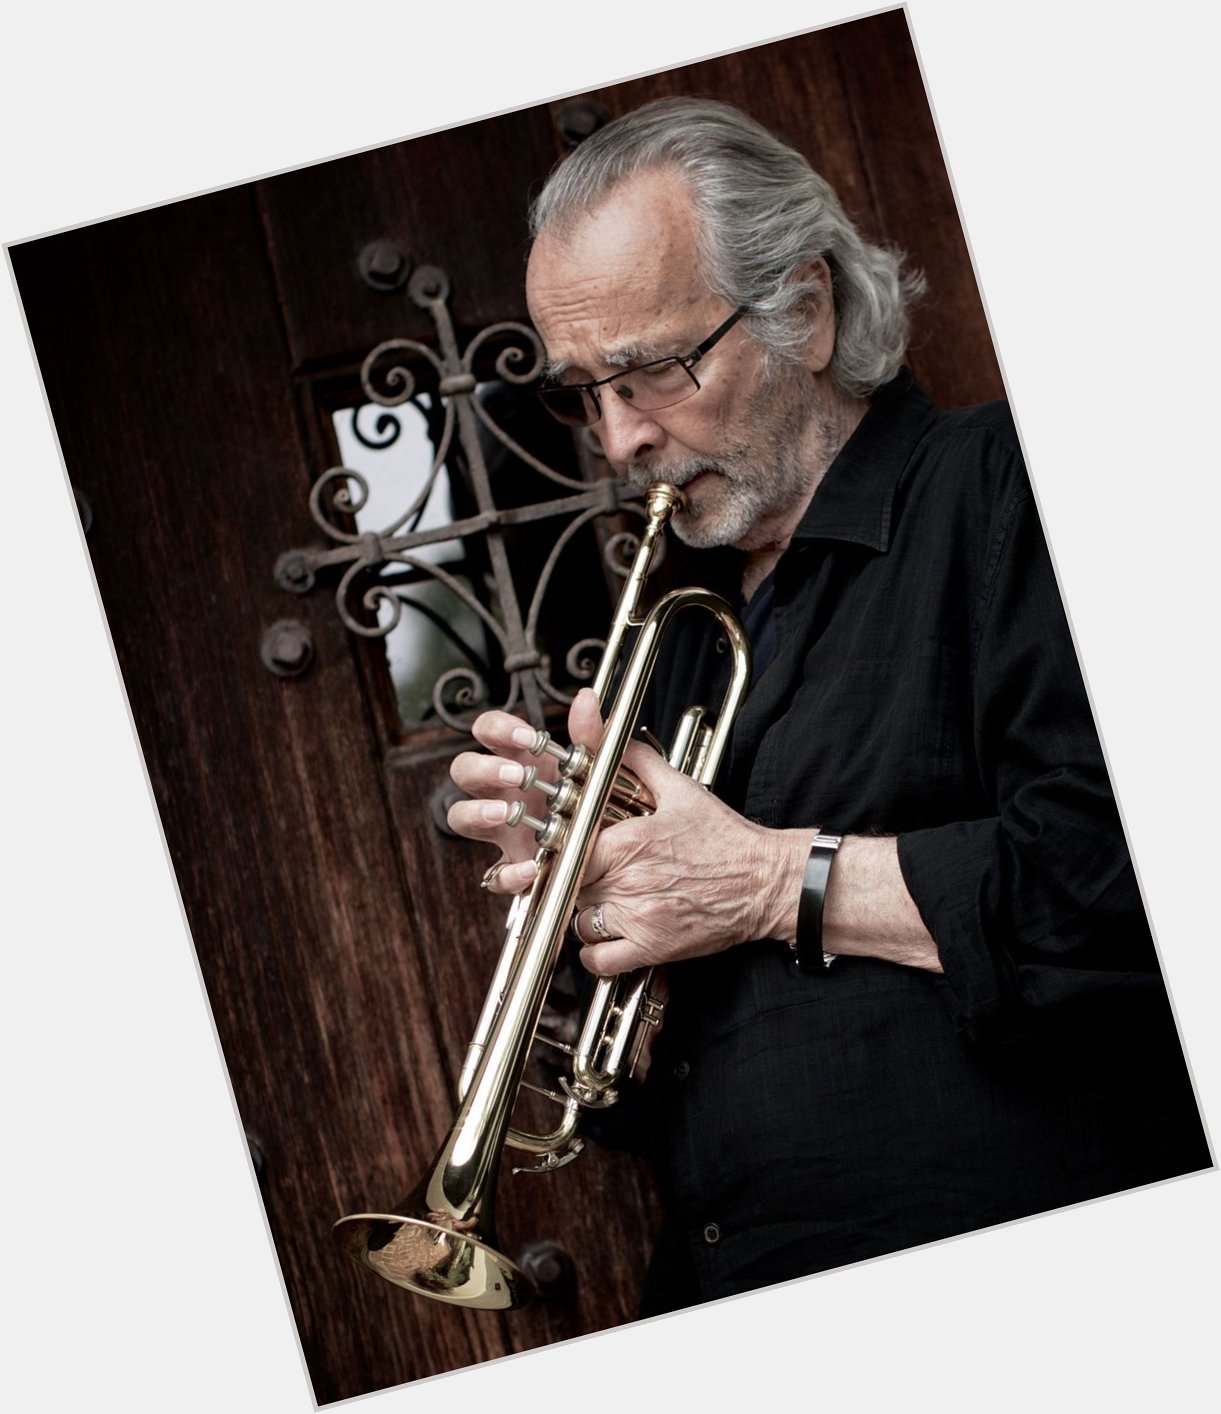 A Big BOSS Happy Birthday today to Herb Alpert from all of us at Boss Boss Radio 